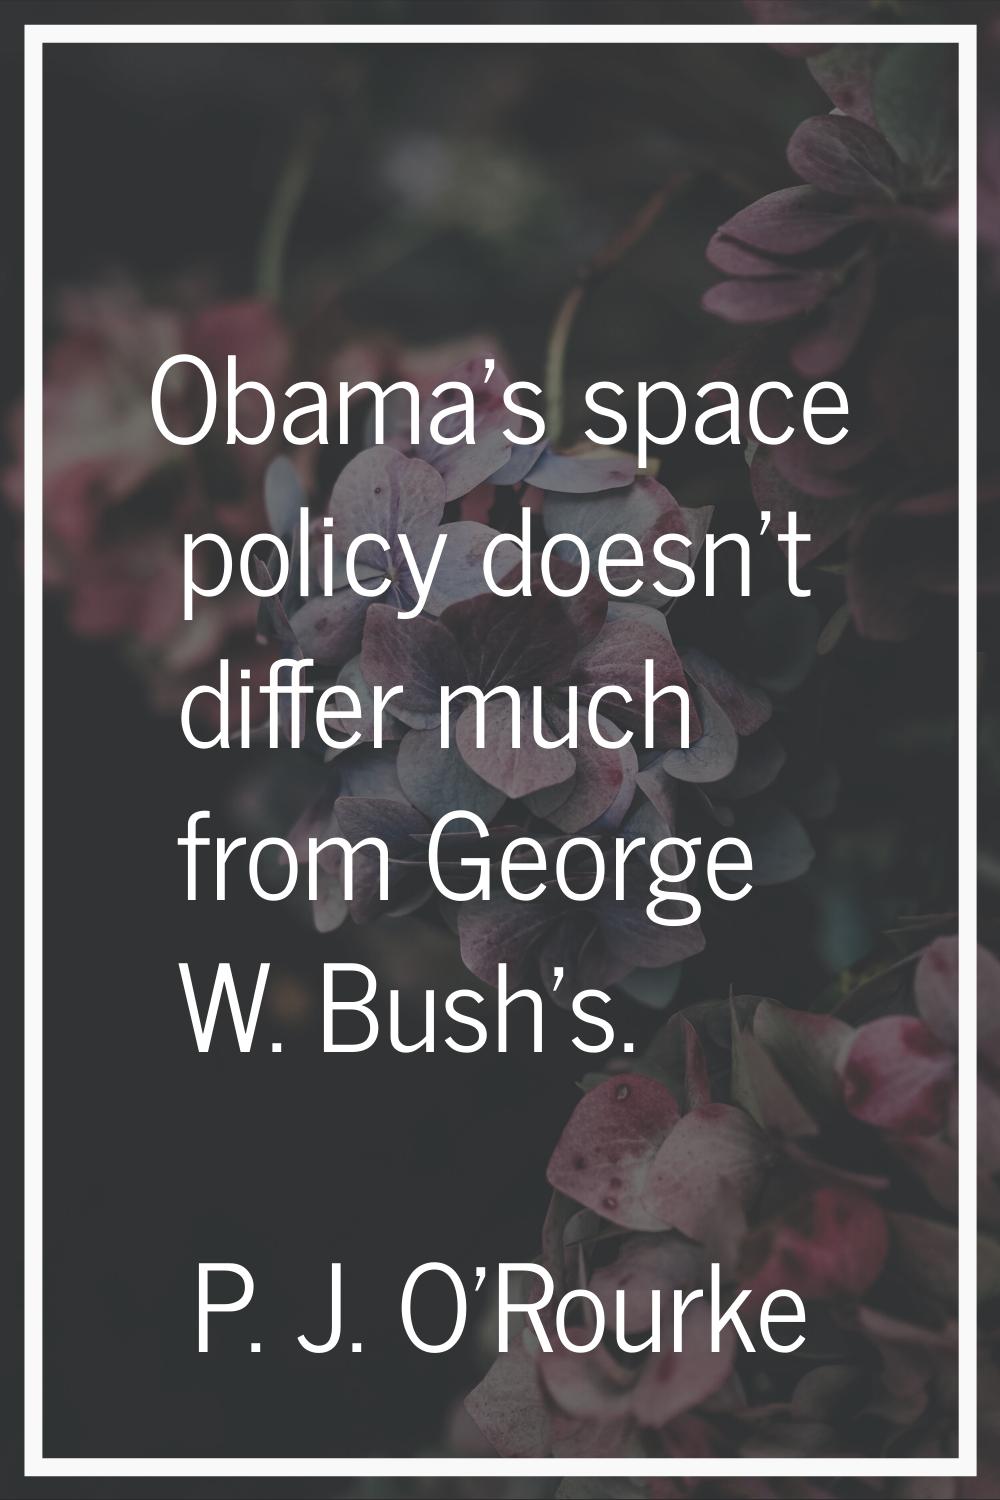 Obama's space policy doesn't differ much from George W. Bush's.